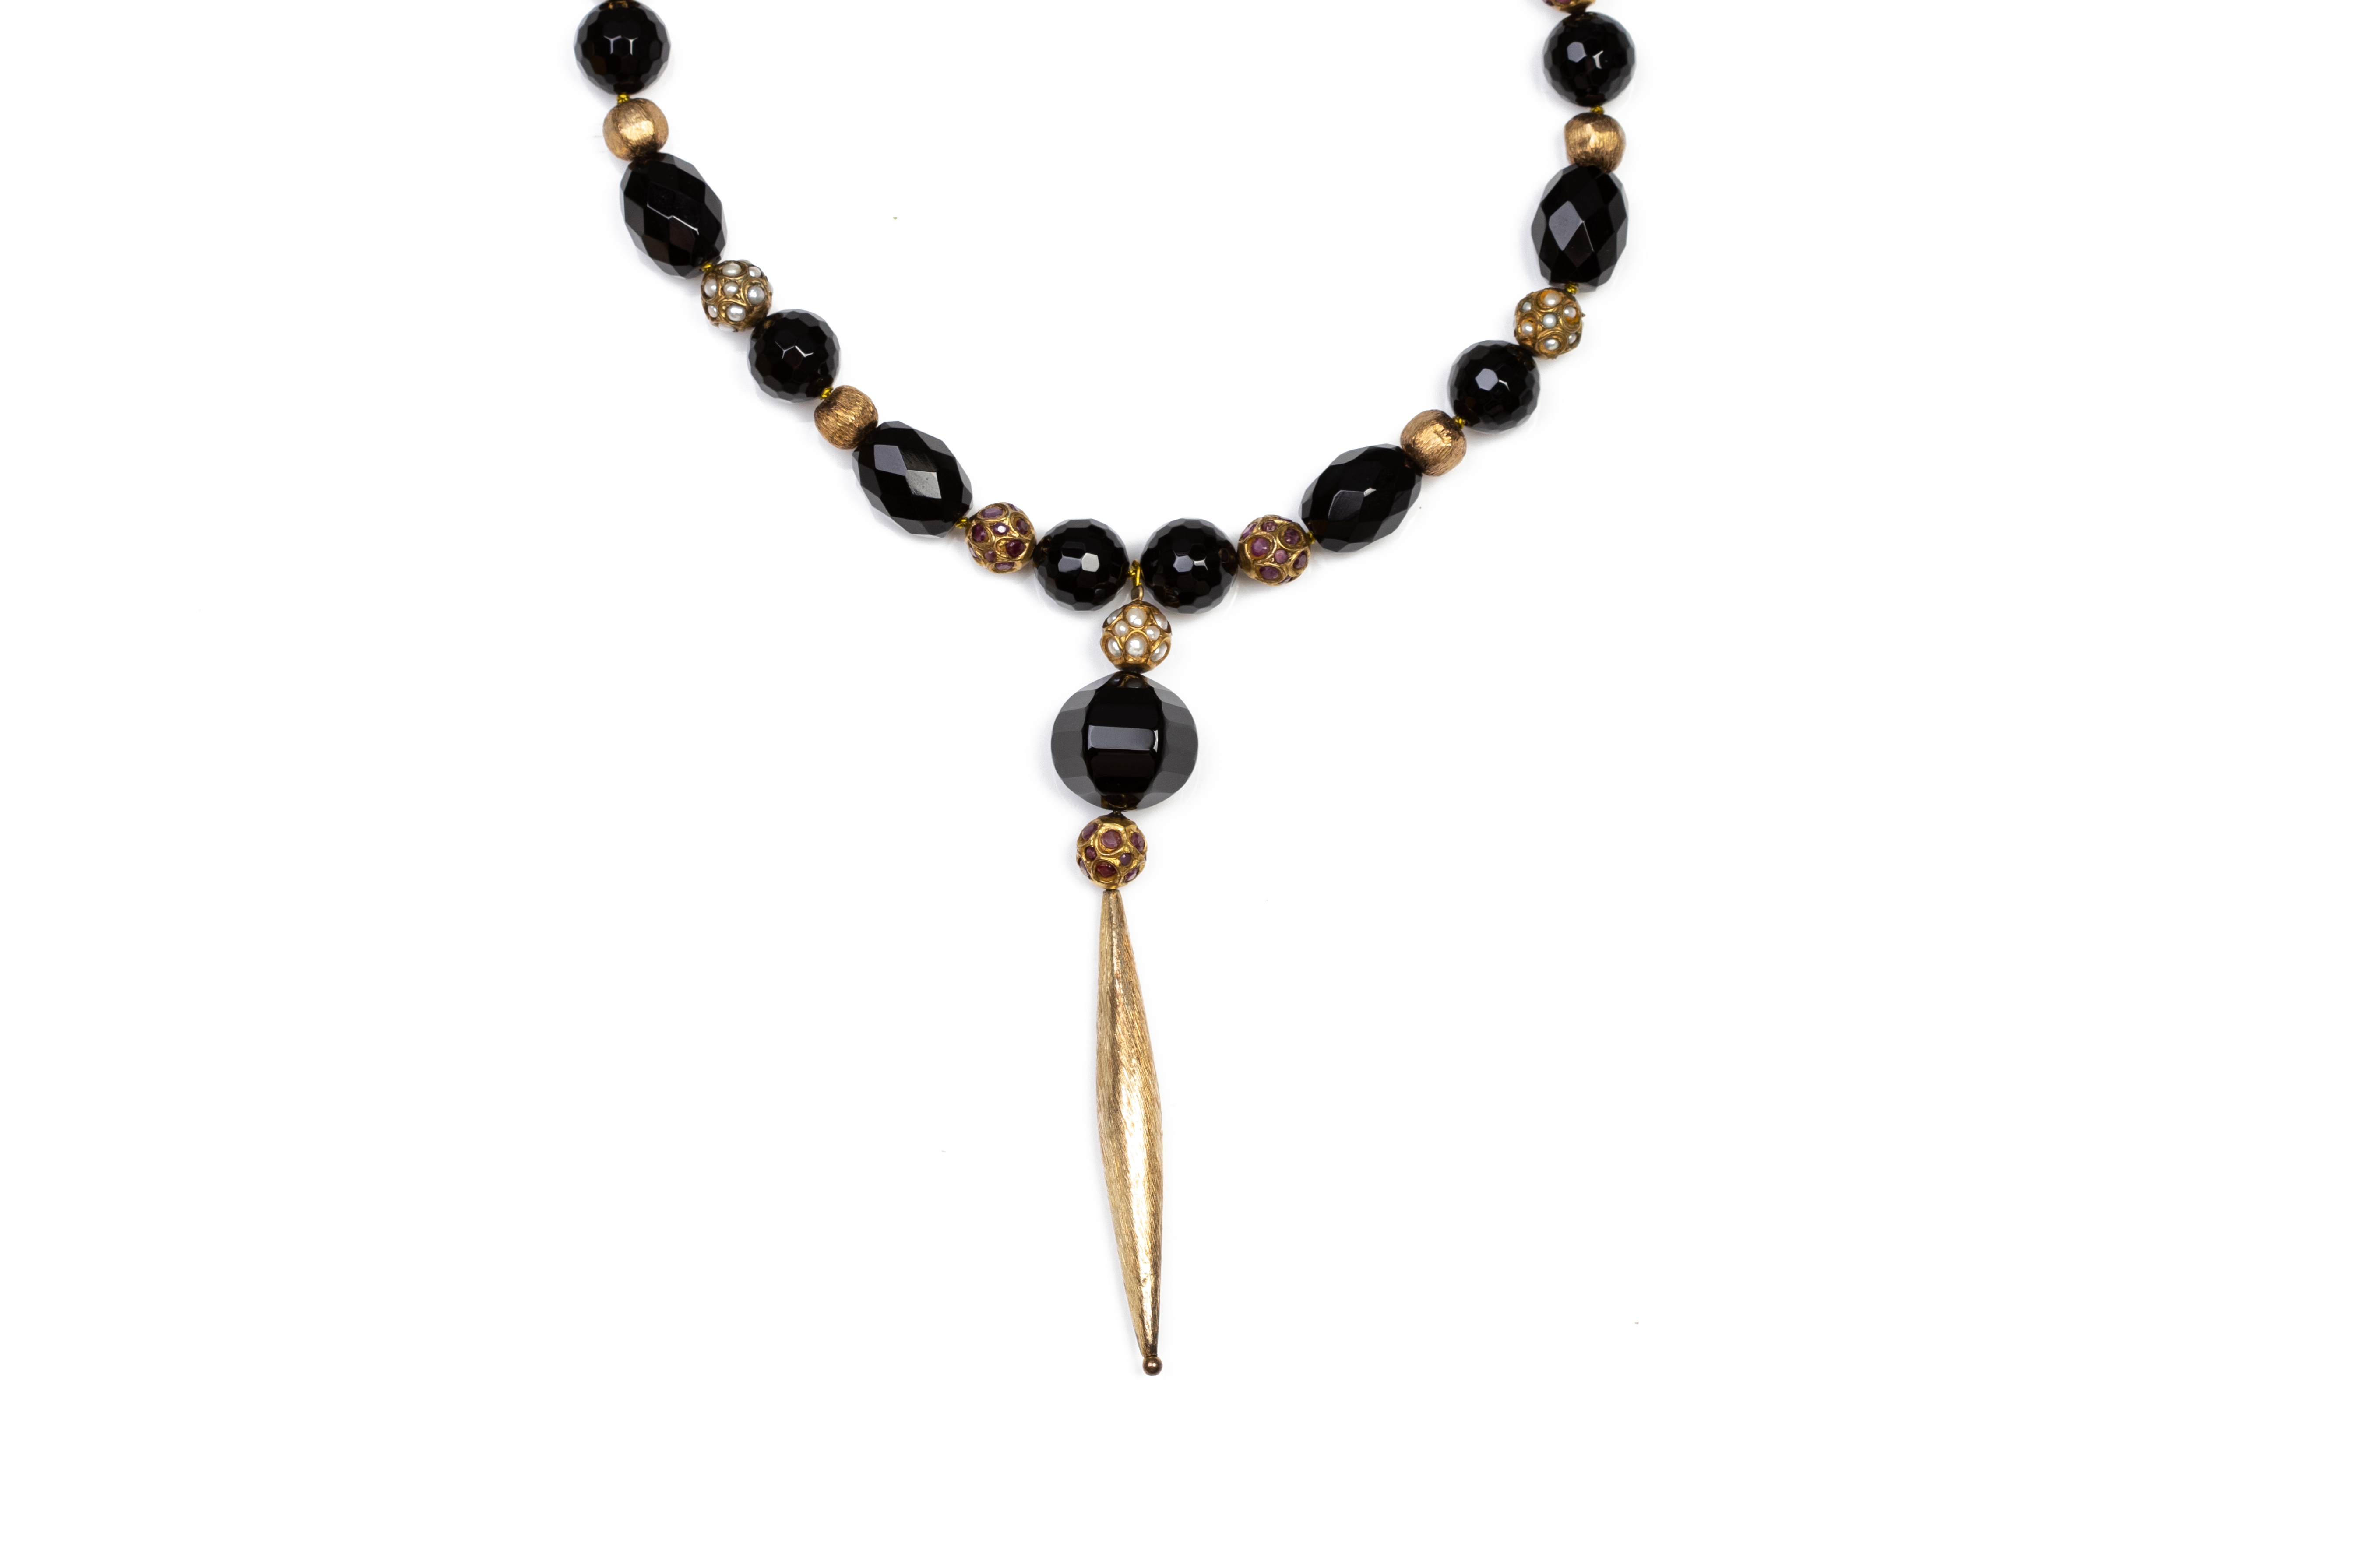 A MOJA JEWELLERY ONYX RUBY PEARL NECKLACE - Image 2 of 4